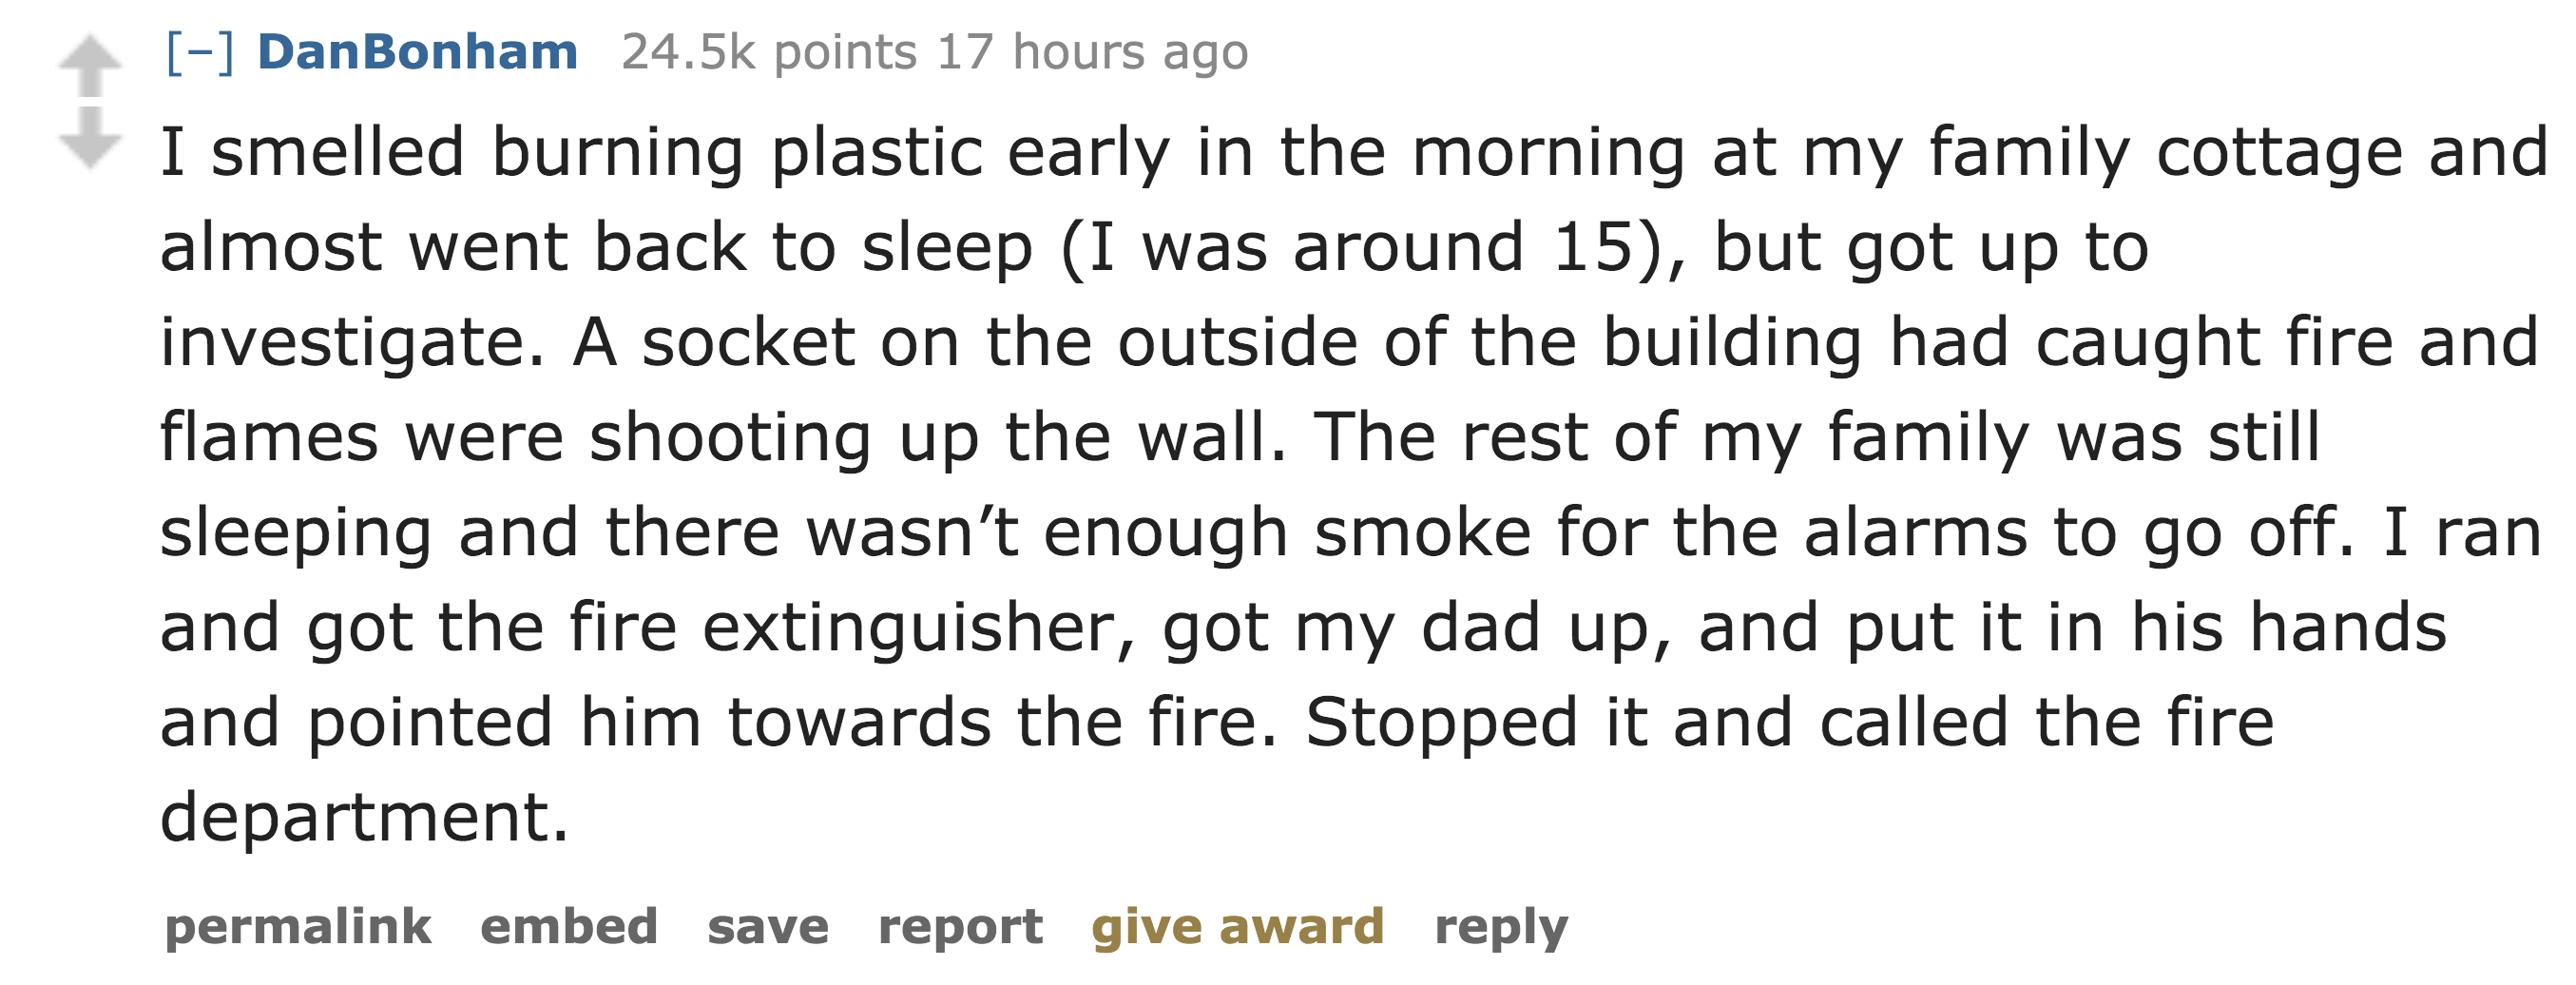 funny random - DanBonham points 17 hours ago I smelled burning plastic early in the morning at my family cottage and almost went back to sleep I was around 15, but got up to investigate. A socket on the outside of the building had caught fire and flames w